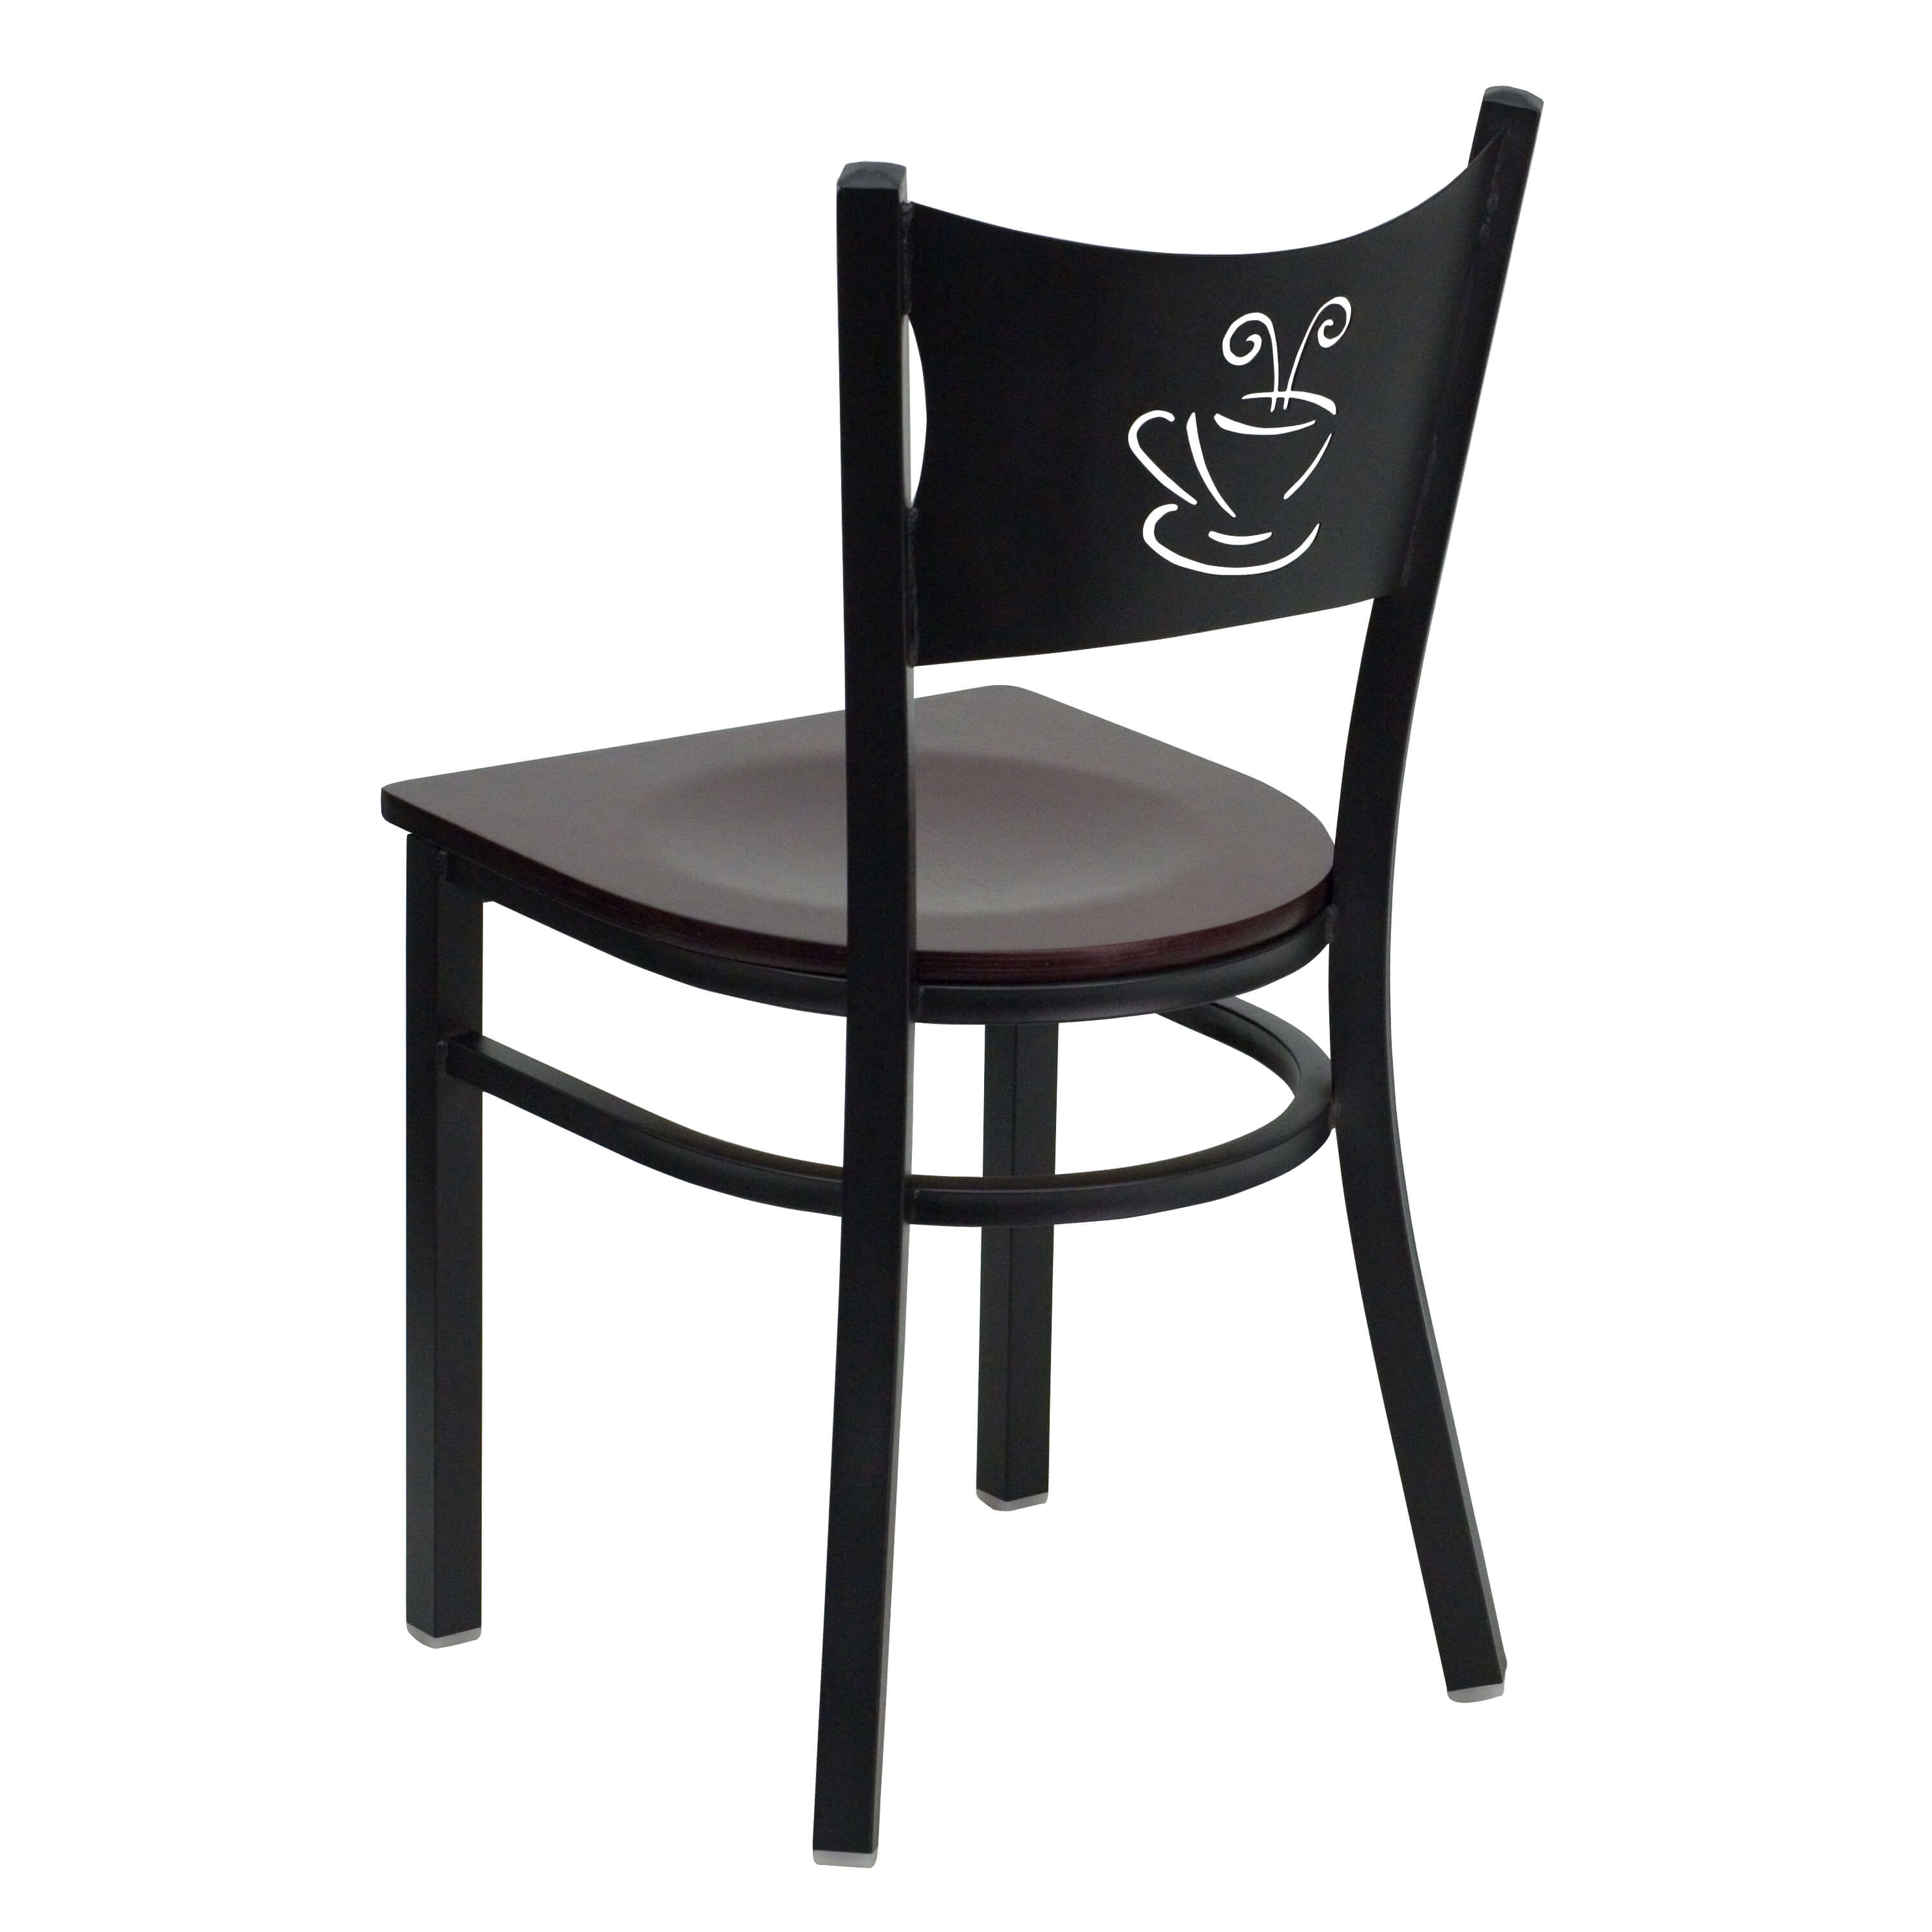 Coffe back casual dining chair back view